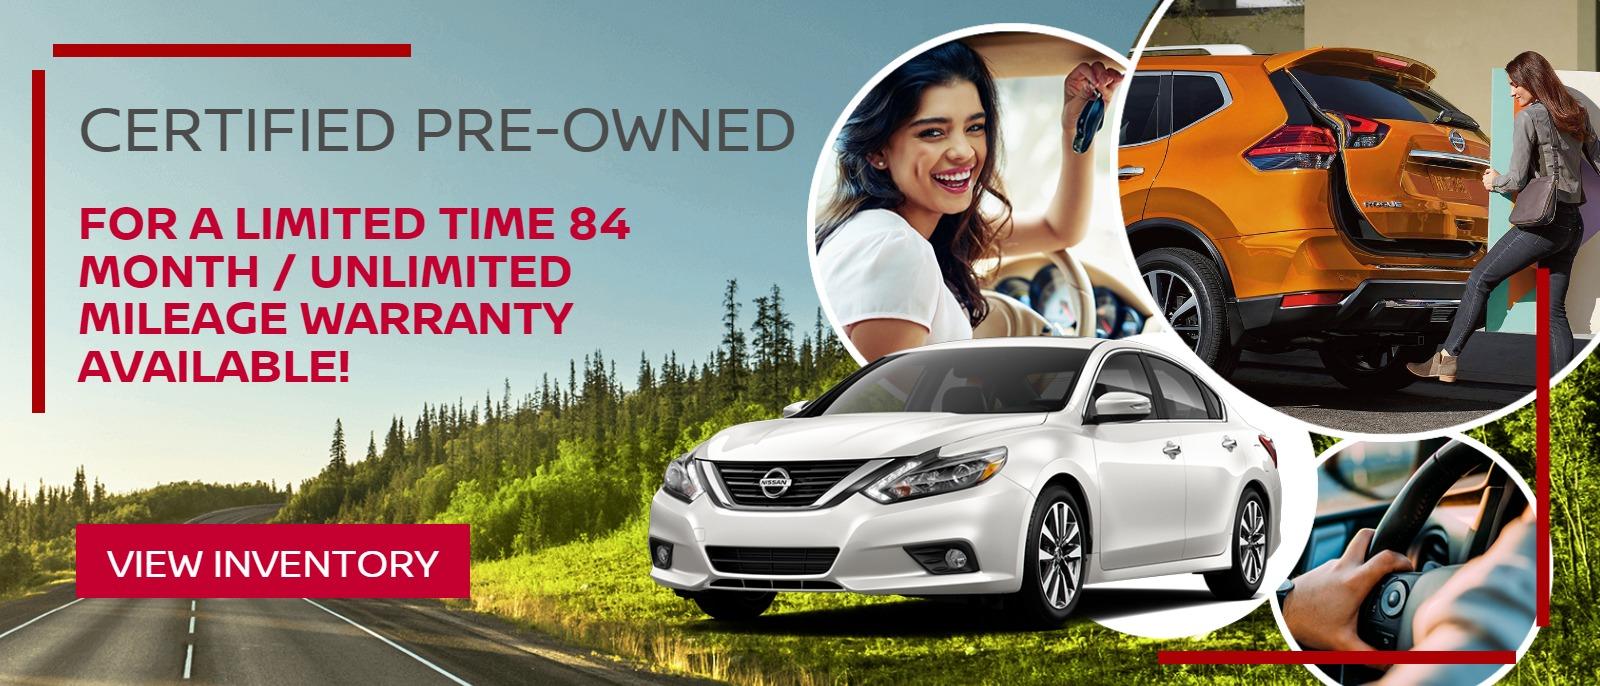 Nissan Certified Inventory for a limited time 84 month/ unlimited mileage warranty available